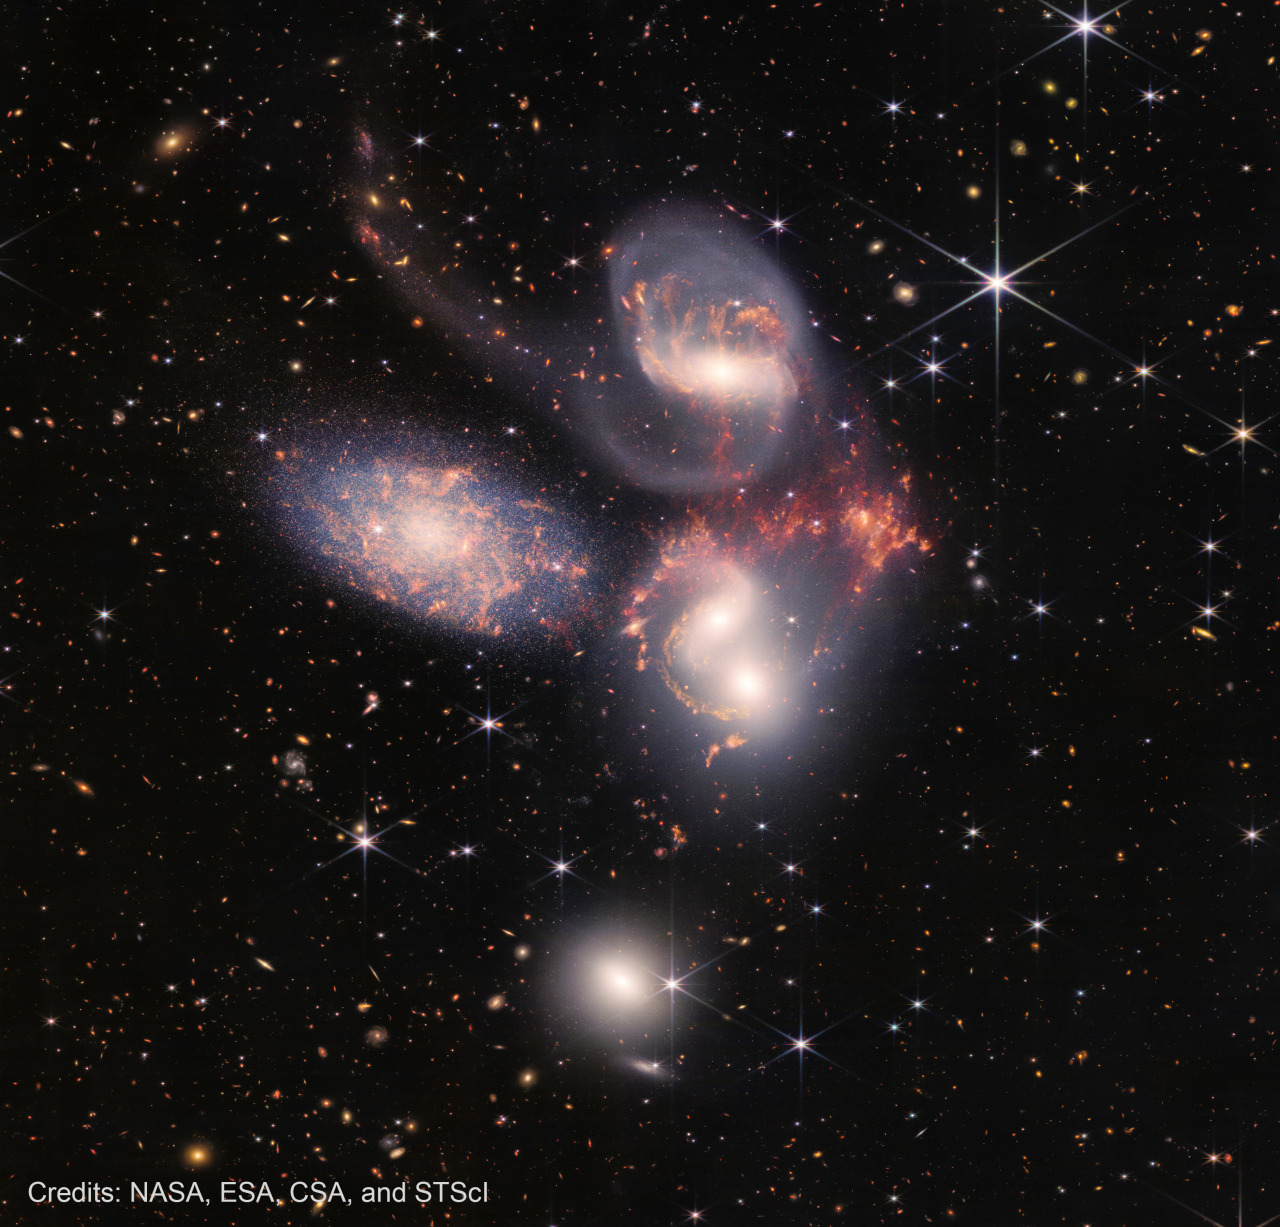 A group of five galaxies that appear close to each other in the sky: two in the middle, one toward the top, one to the upper left, and one toward the bottom. Four of the five appear to be touching. One is somewhat separated. In the image, the galaxies are large relative to the hundreds of much smaller (more distant) galaxies in the background. All five galaxies have bright white cores. Each has a slightly different size, shape, structure, and coloring. Scattered across the image, in front of the galaxies are a number of foreground stars with diffraction spikes: bright white points, each with eight bright lines radiating out from the center. The image is watermarked with the text “Credits: NASA, ESA, CSA, and STScI.”